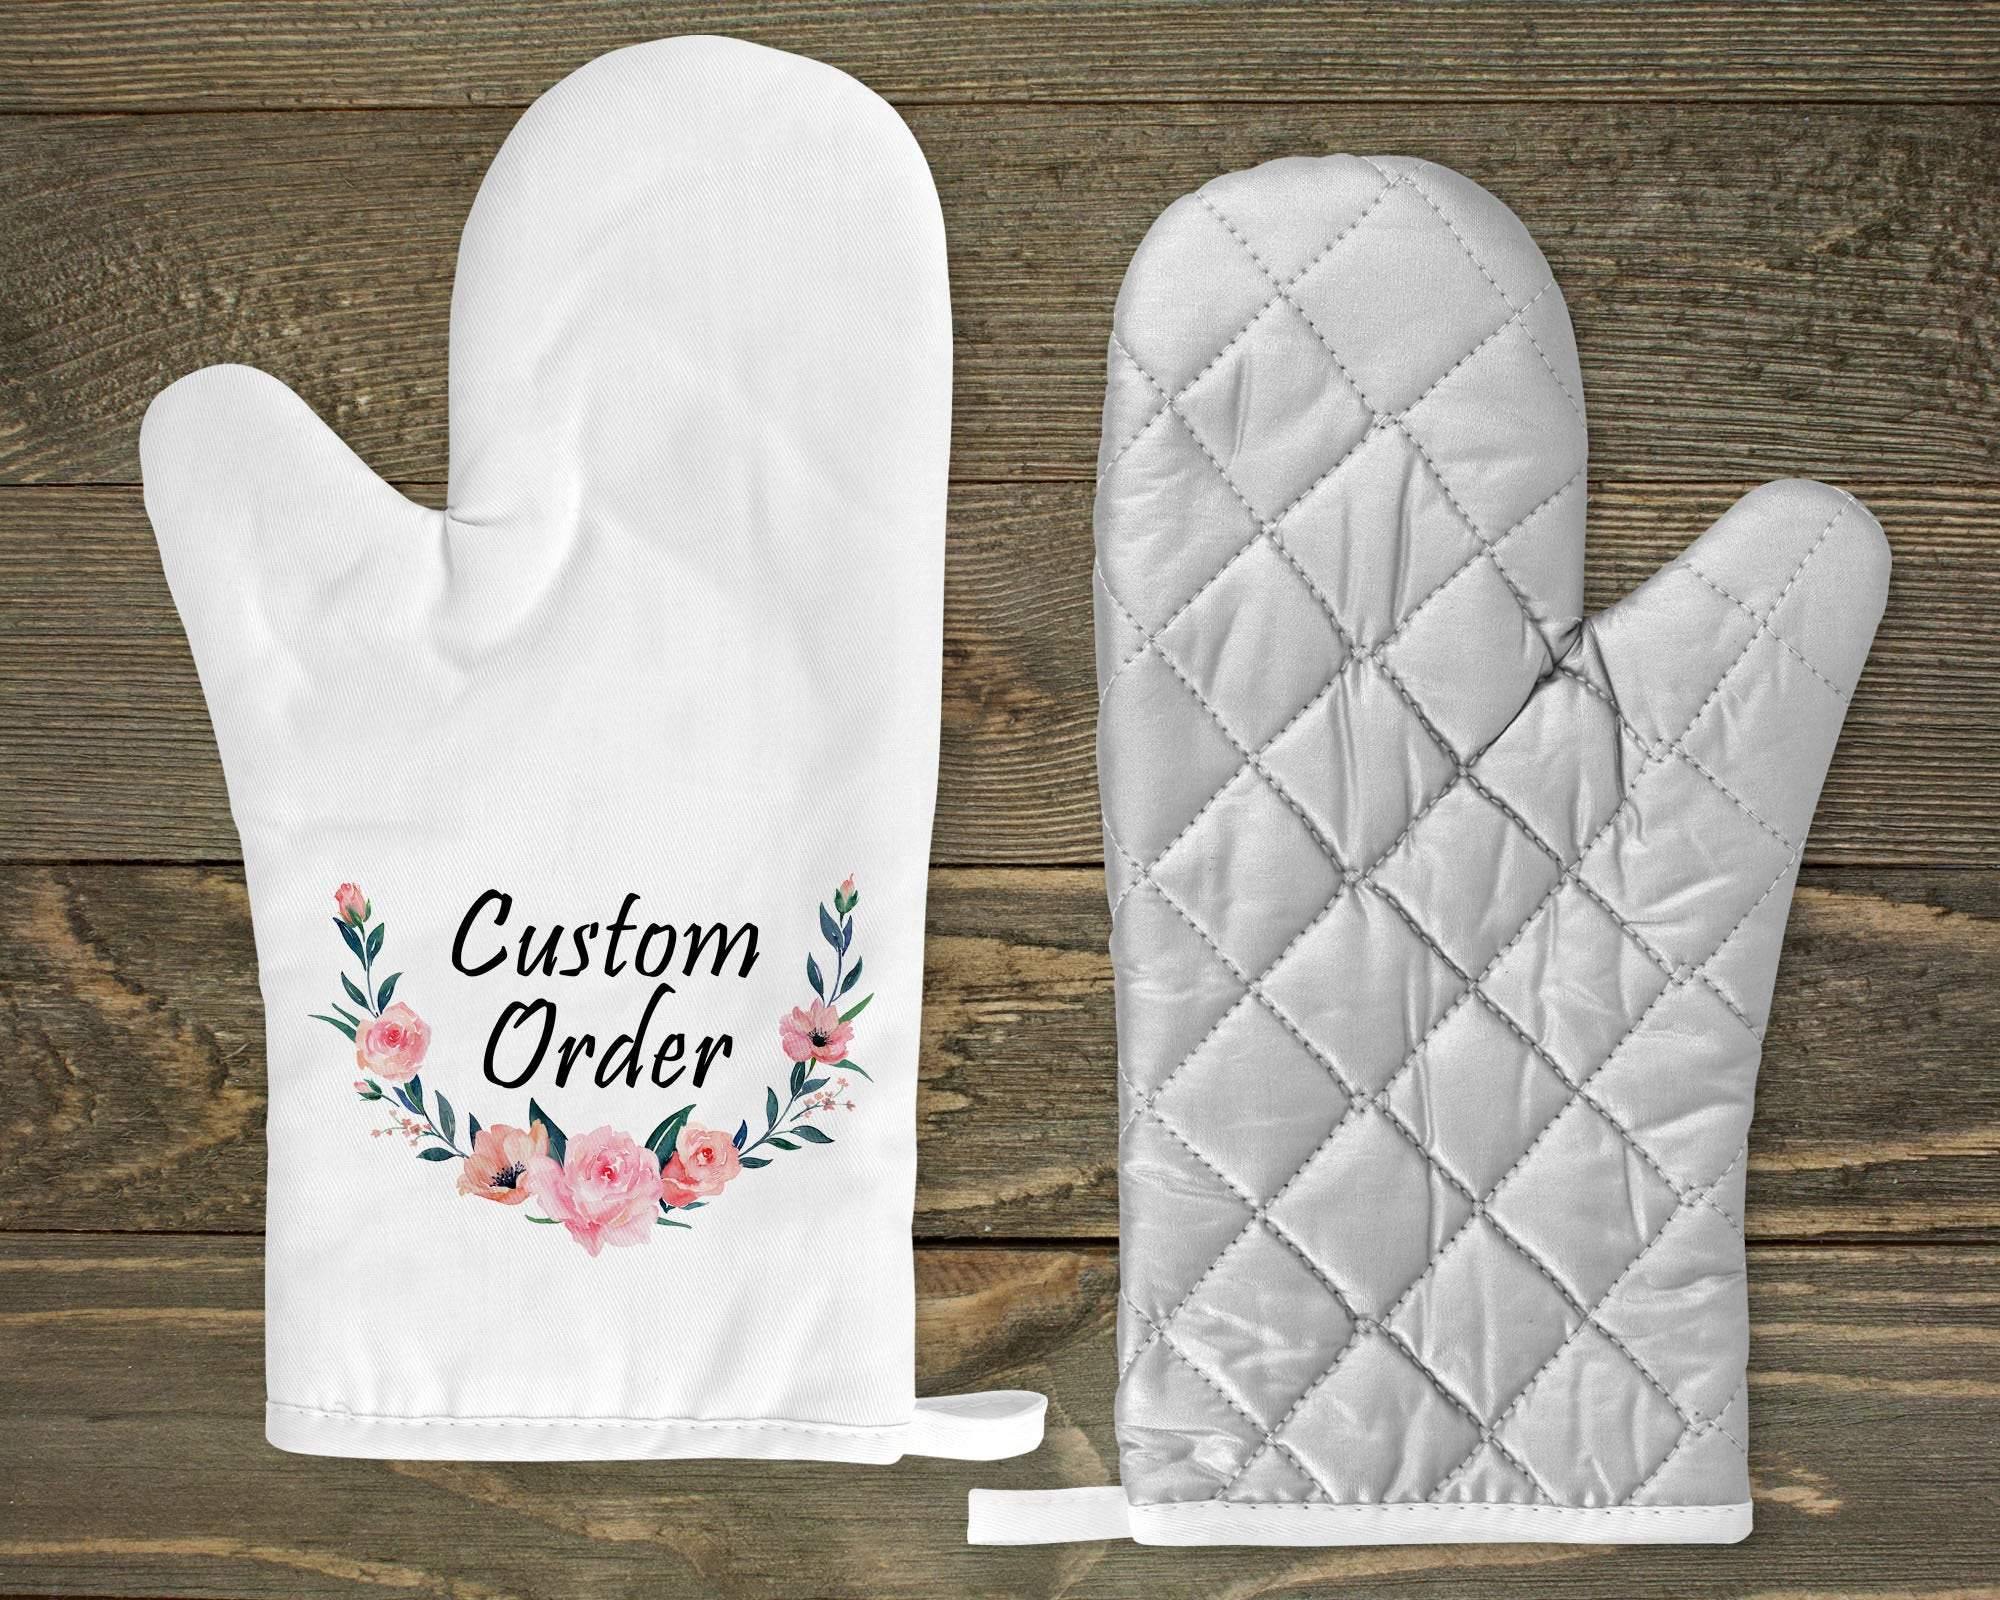 Personalized Oven Mitts  Custom Order - This & That Solutions